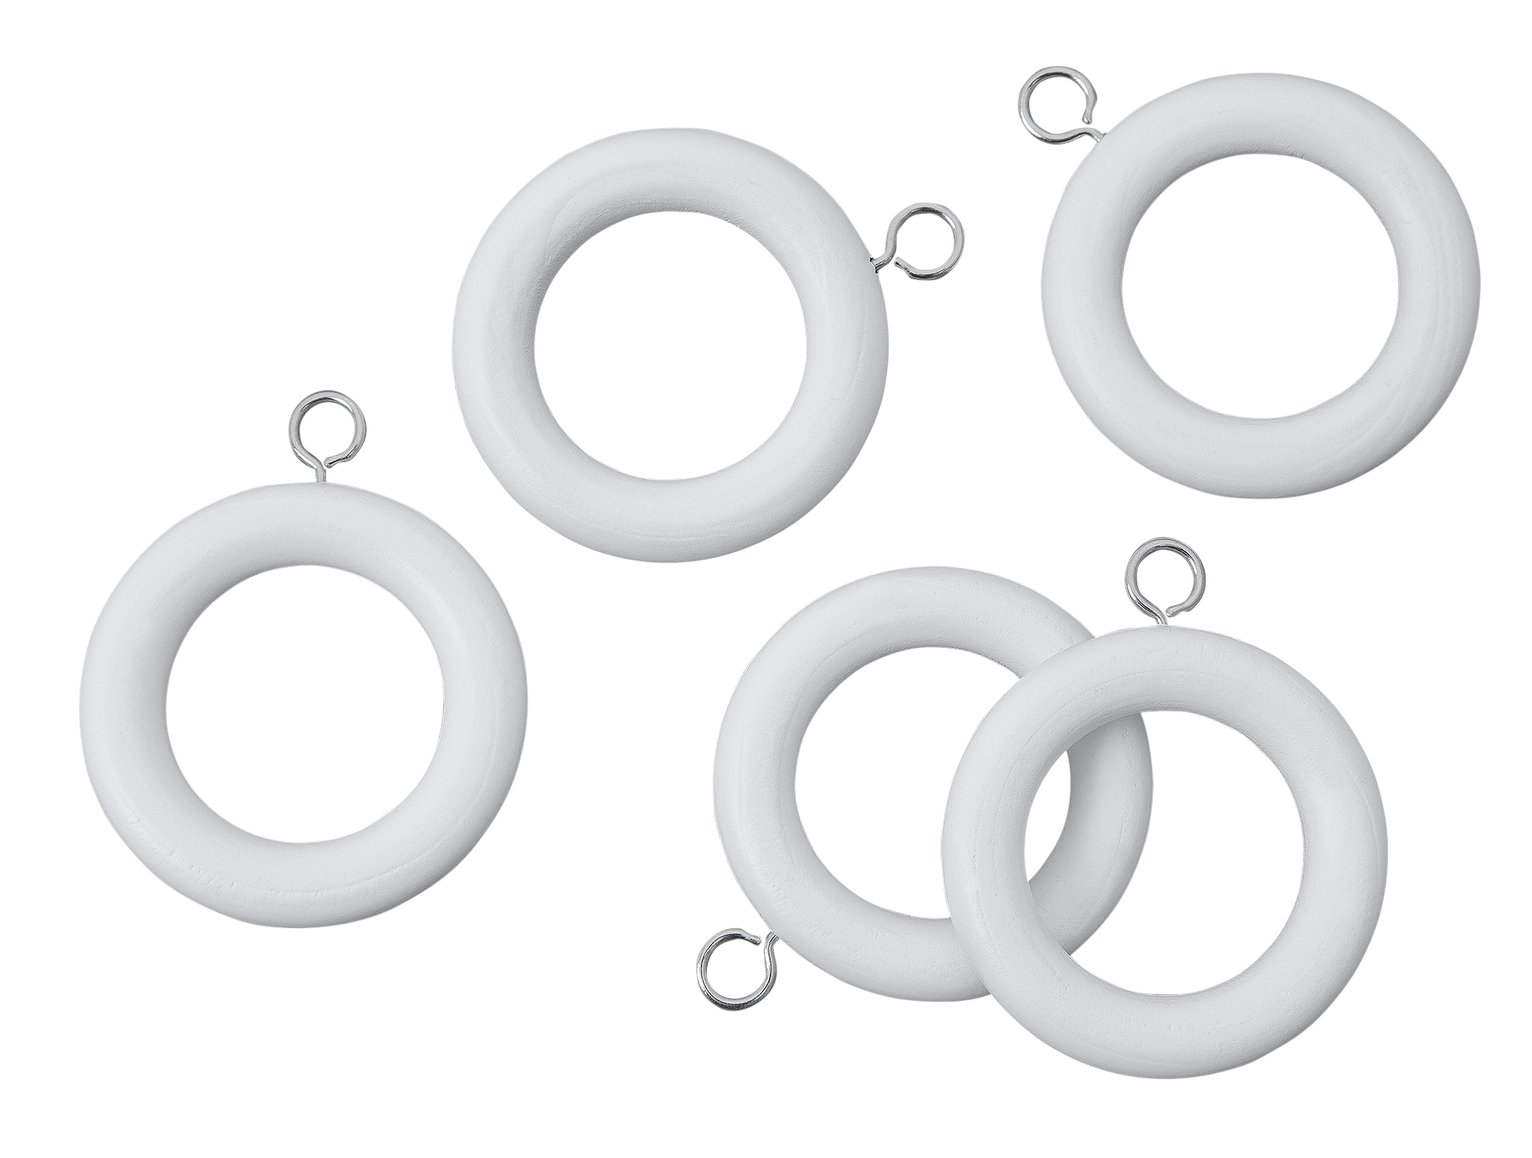 Argos Home Pack of 20 Wooden Curtain Rings - White